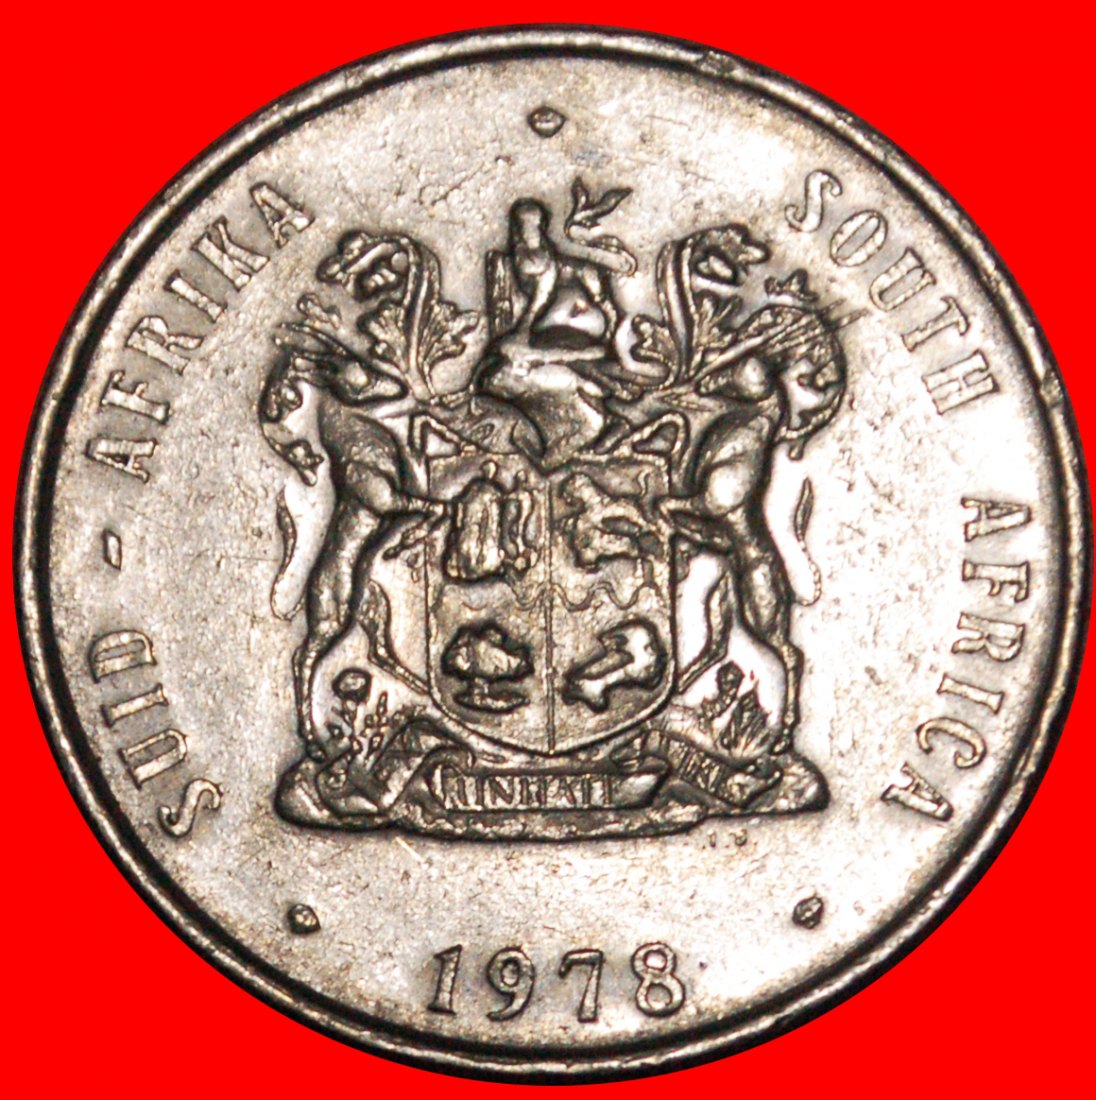  * SPRINGBOK (1977-1989): SOUTH AFRICA ★ 1 RAND 1978 DIE A! LOW START ★ NO RESERVE!   